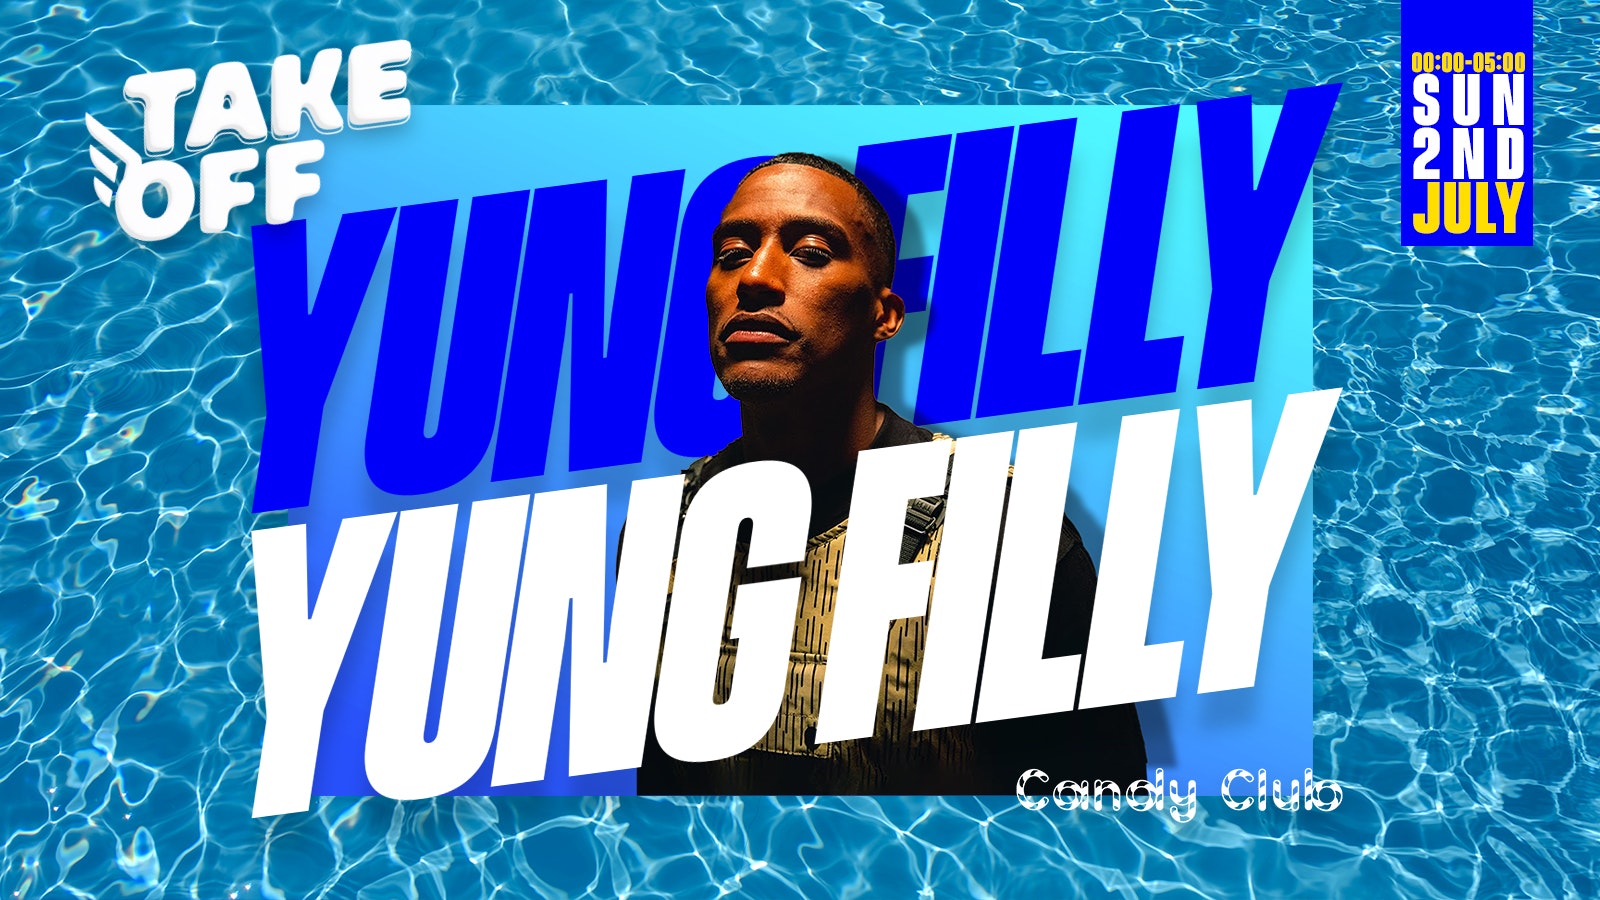 Take Off Presents: YUNG FILLY at Malia Live Sundays